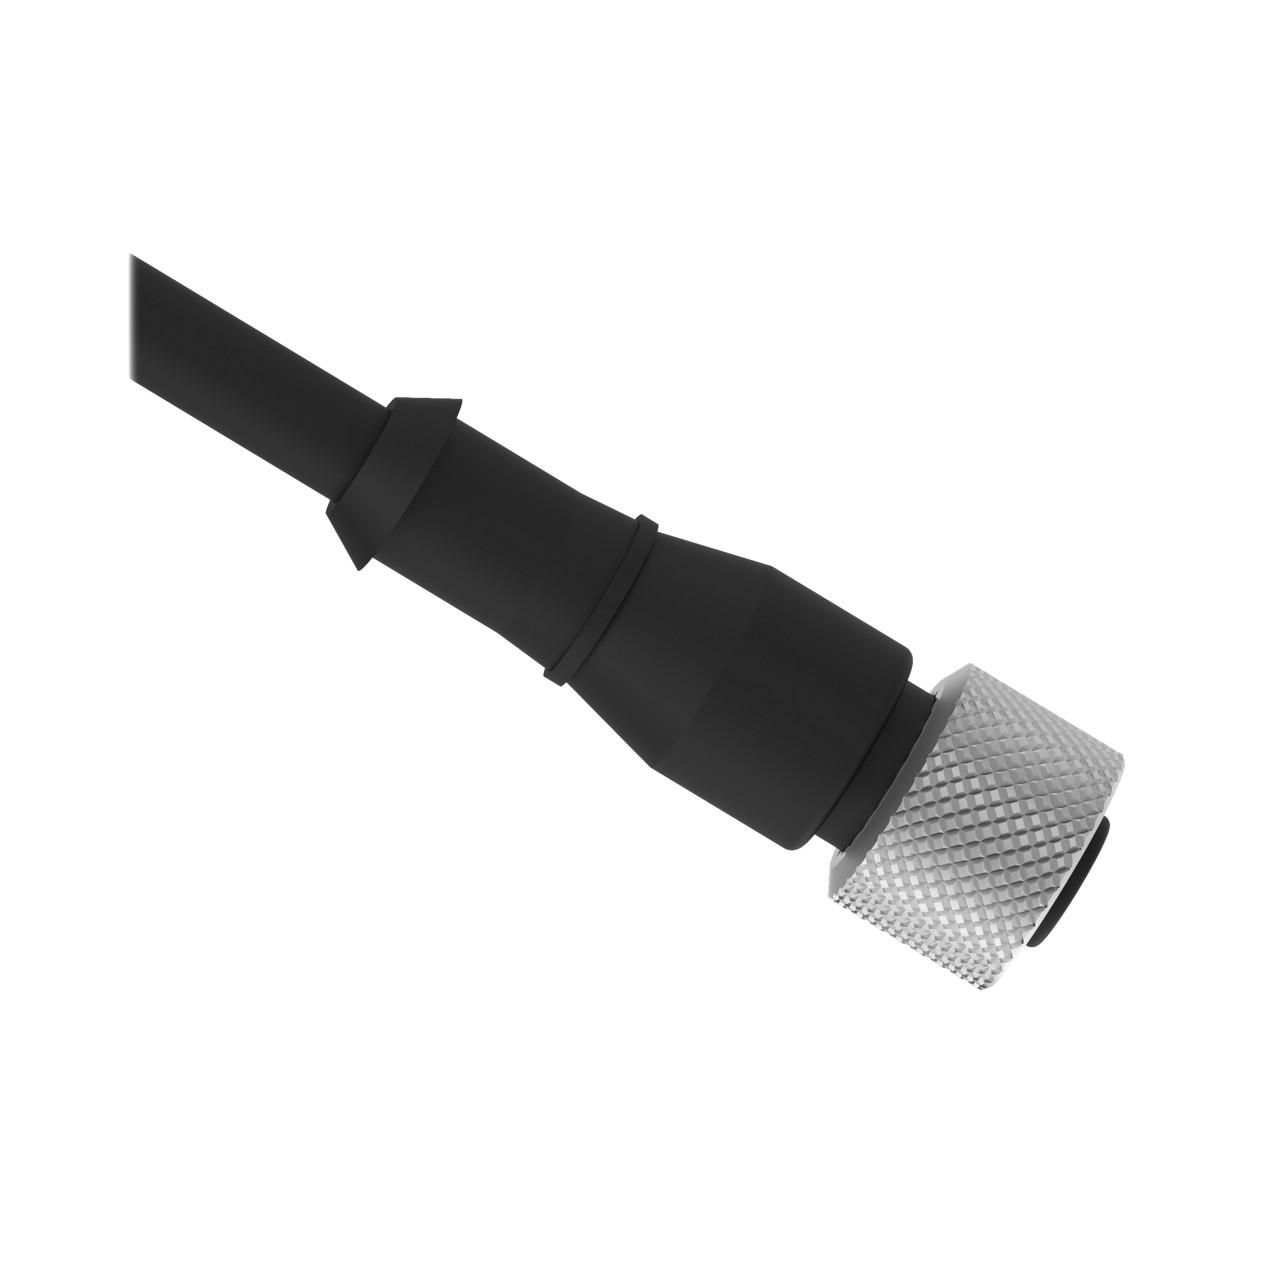 Banner MQDC1-530 Euro-style Quick Disconnect Cable, 5 Pin Straight Connector, 9 m (30 ft) in Length, Chrome plated brass coupling nut